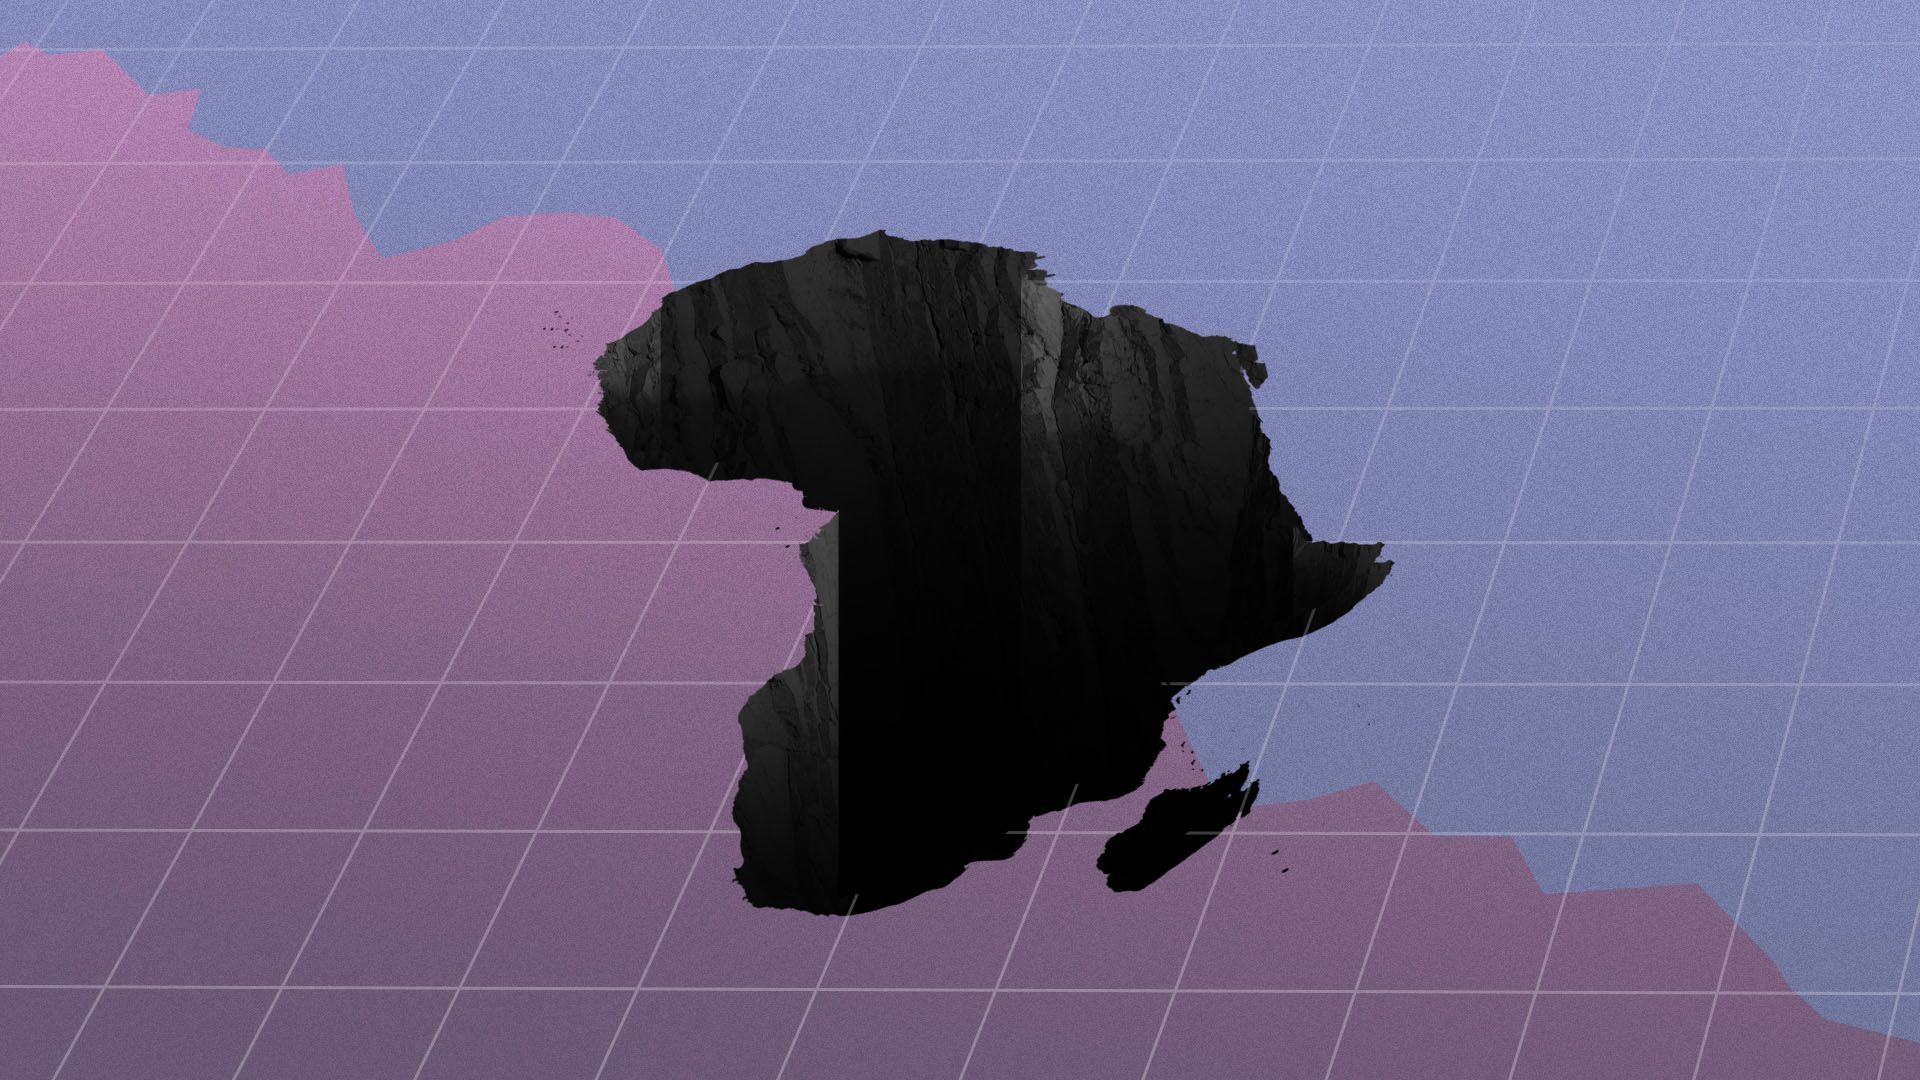 Africa as a hole in the planet